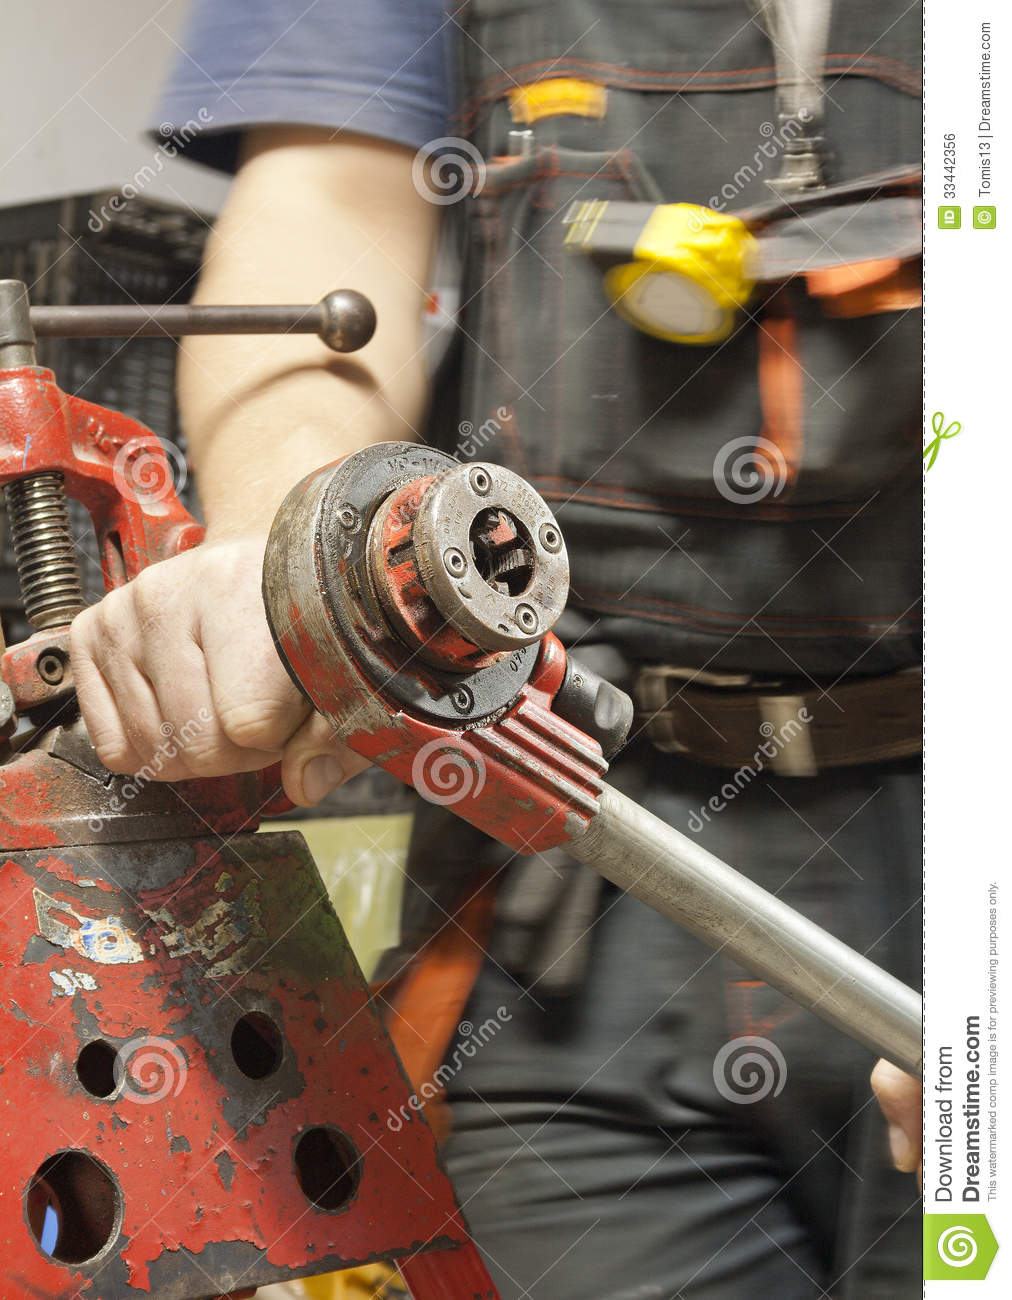 https://www.dreamstime.com/royalty-free-stock-image-threading-steel-pipe-male-hand-special-vise-image33442356